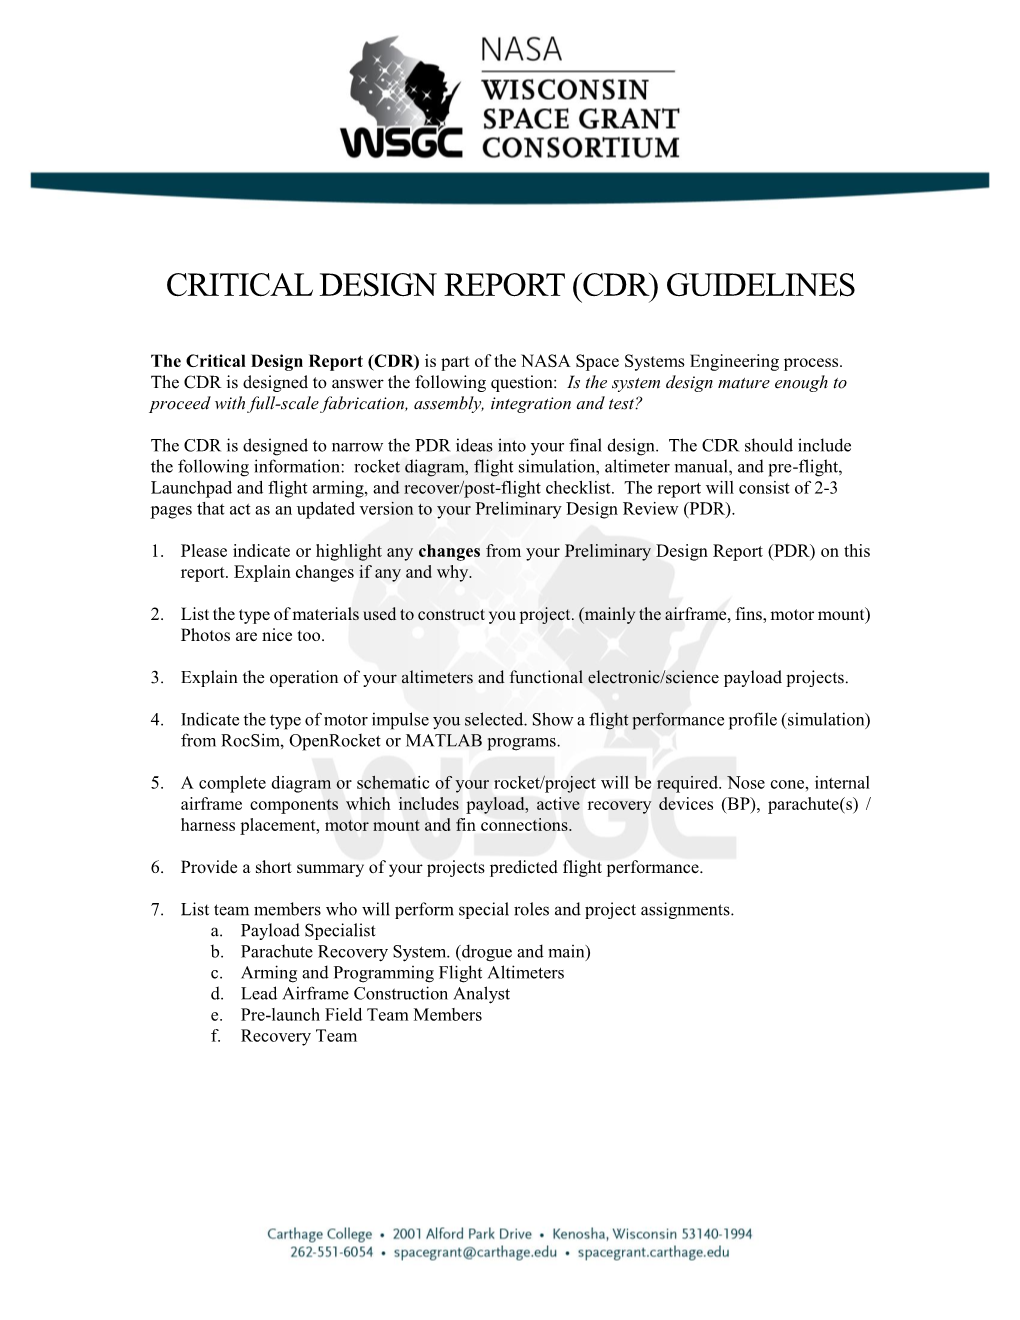 Critical Design Report (Cdr) Guidelines